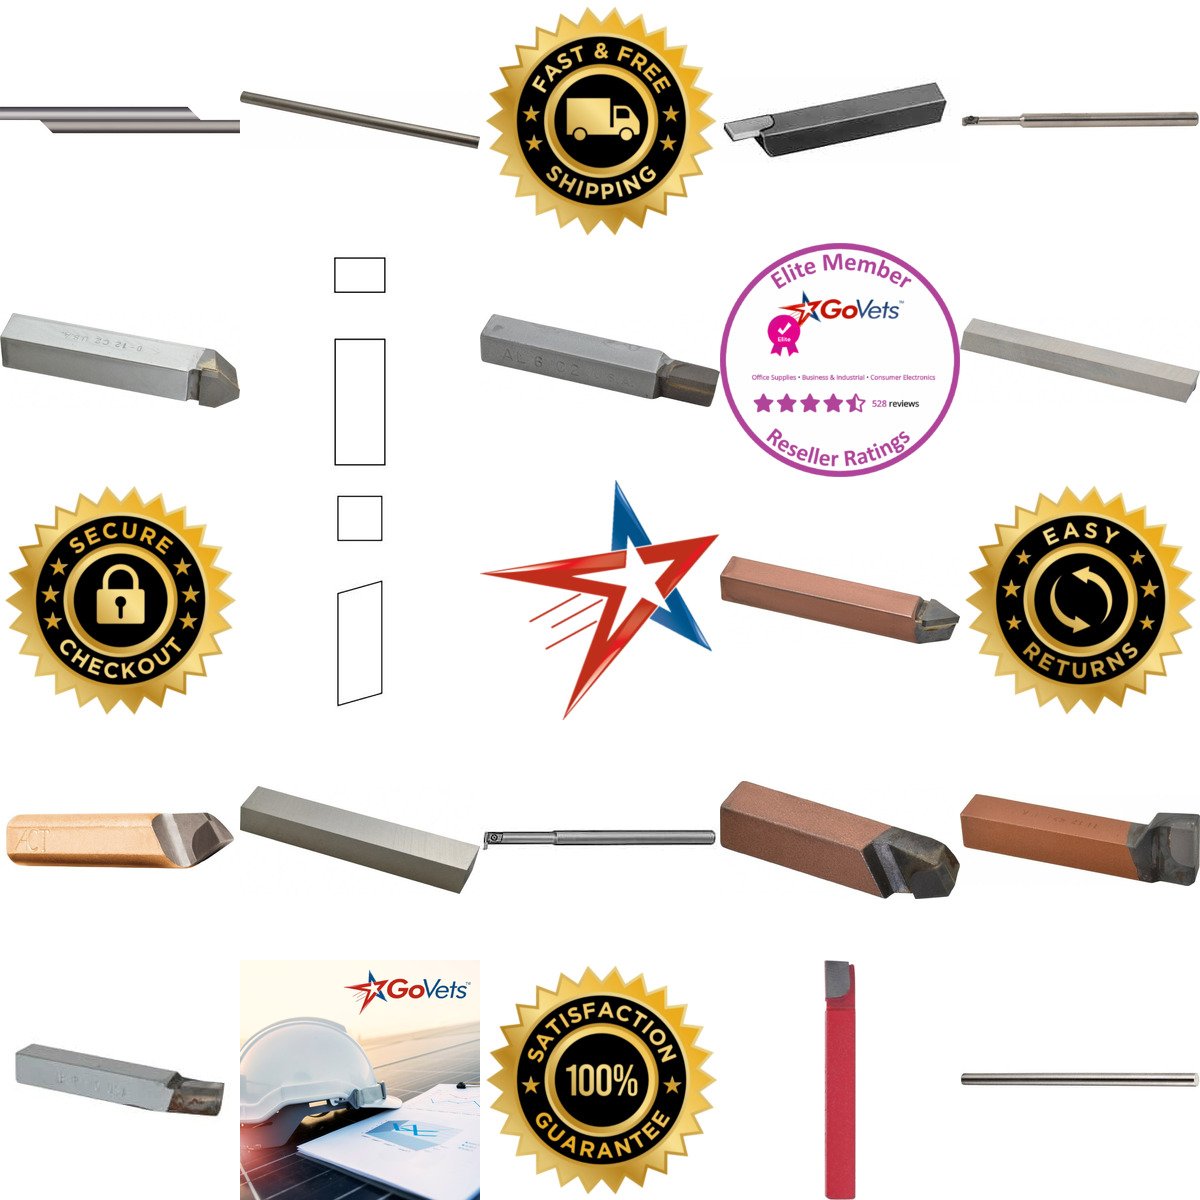 A selection of Lathe Tool Bits and Holders products on GoVets